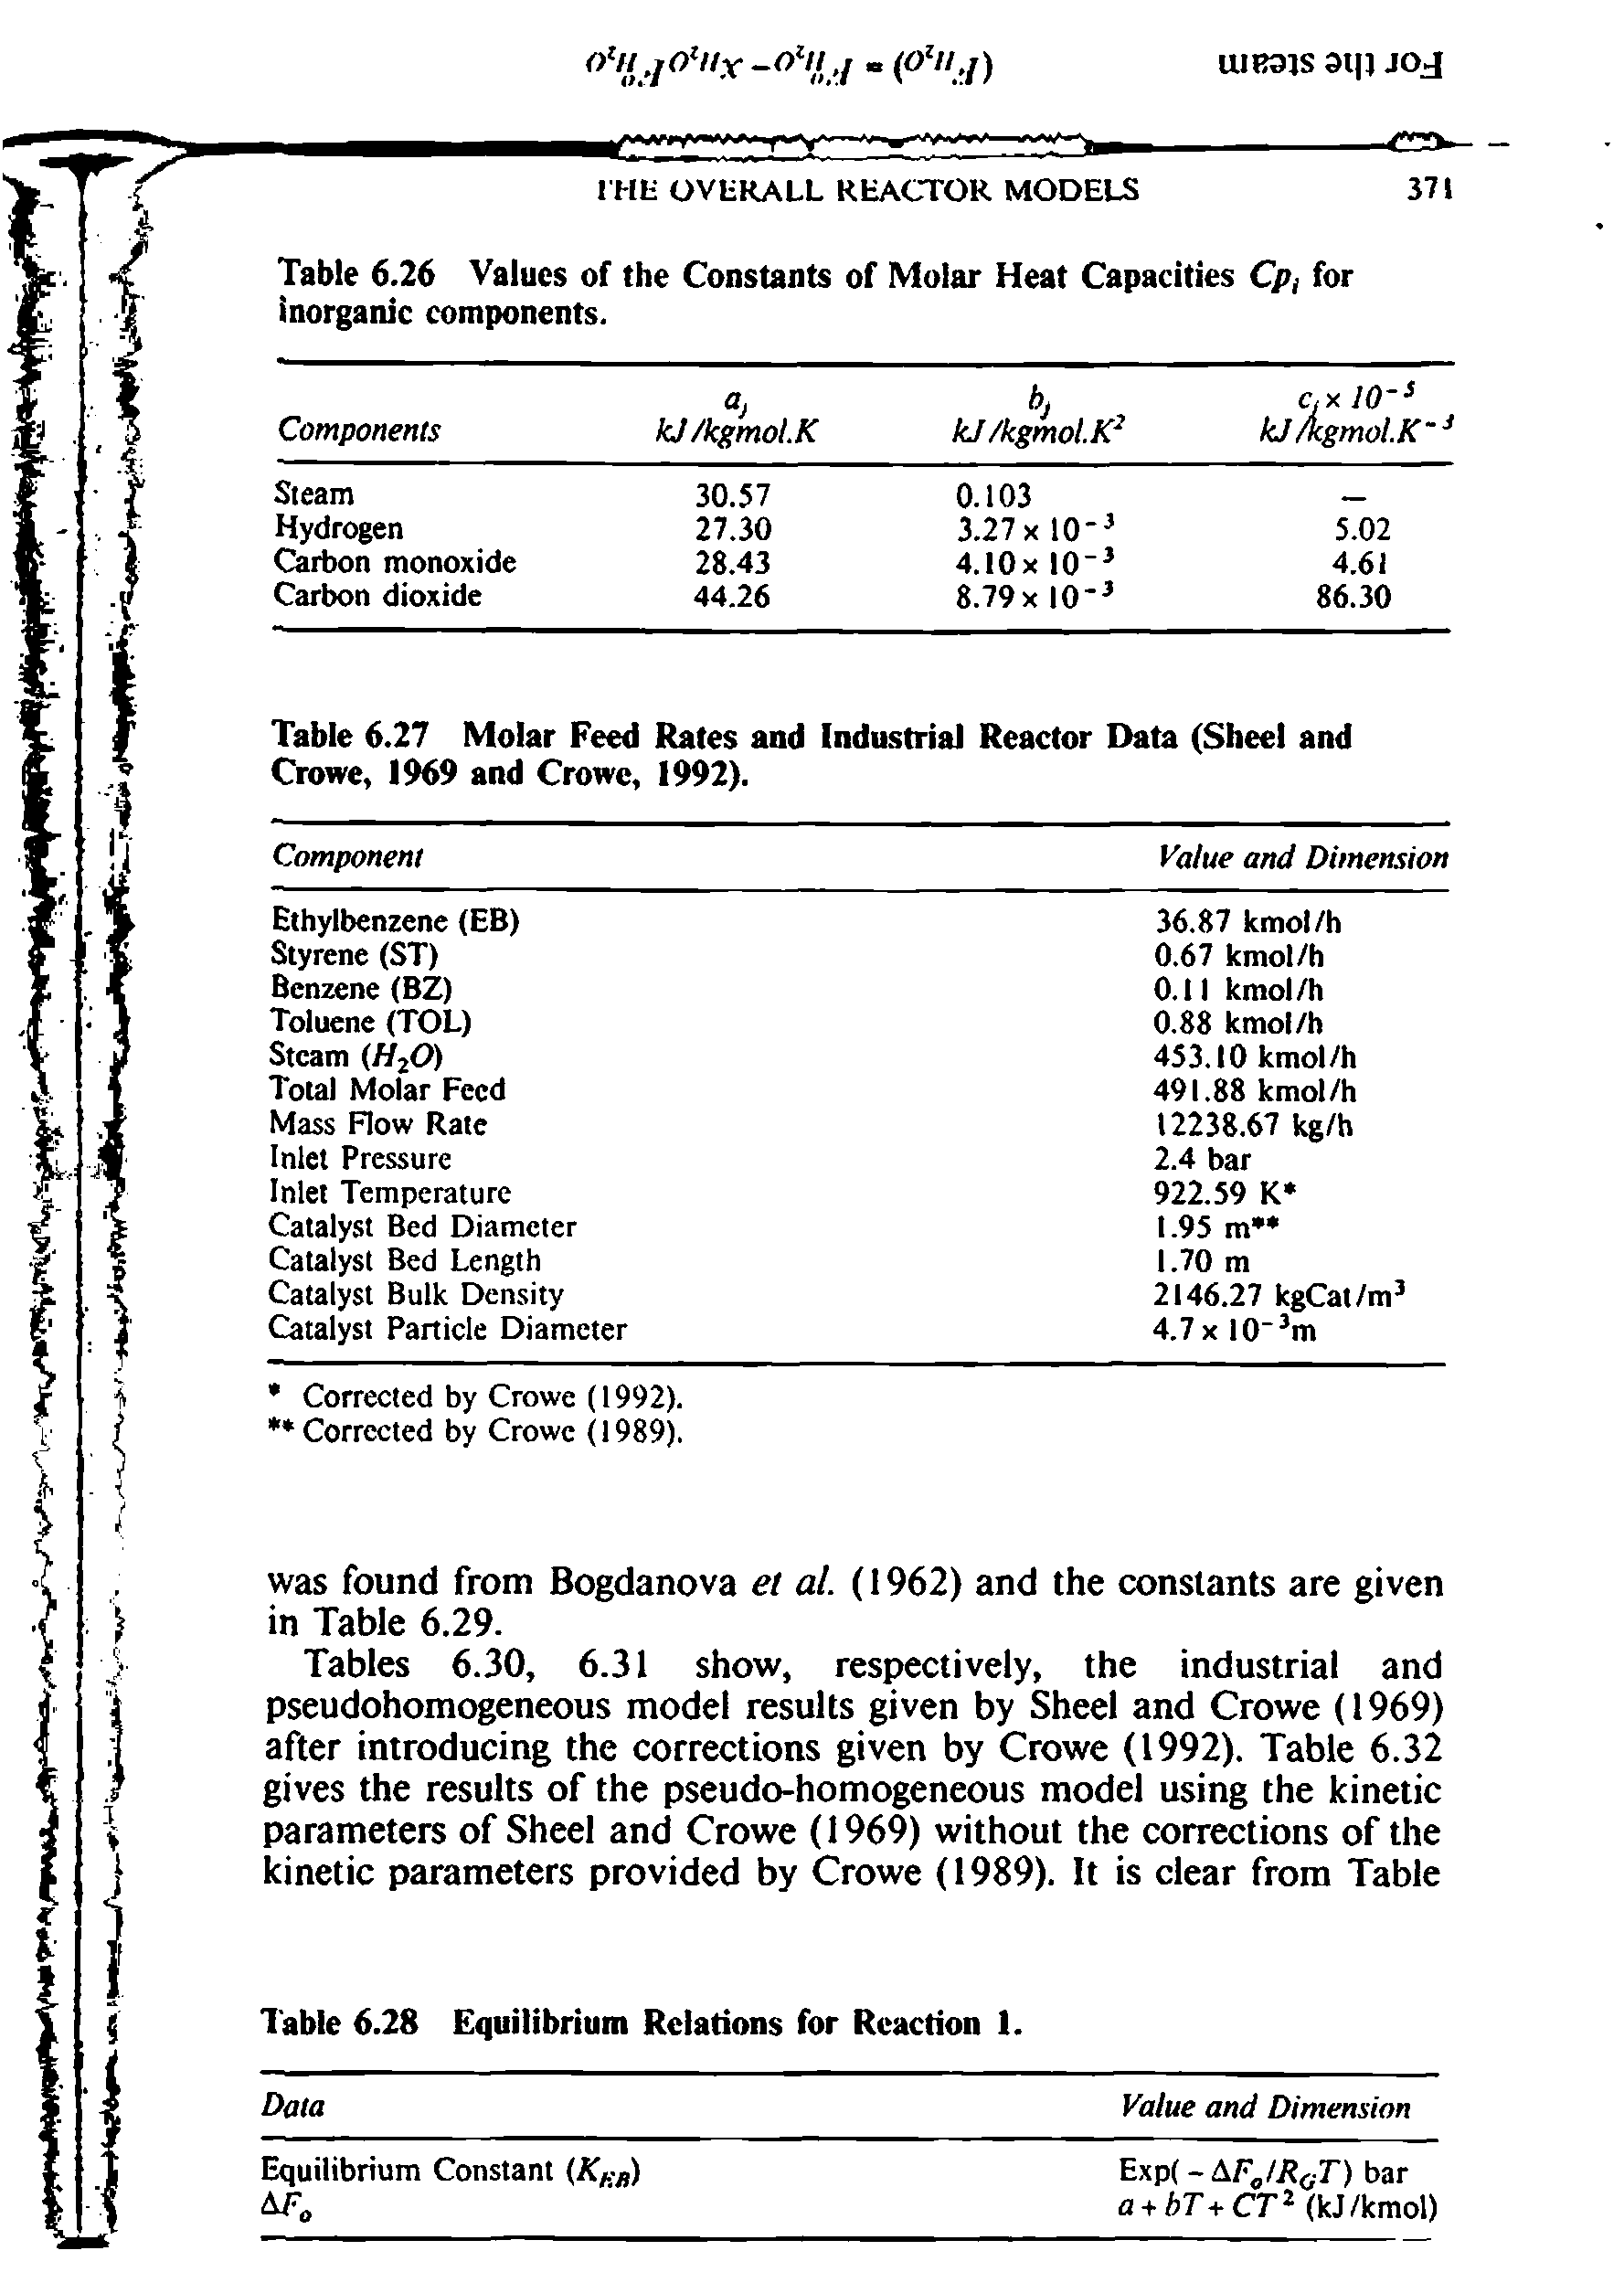 Tables 6.30, 6.31 show, respectively, the industrial and pseudohomogeneous model results given by Sheel and Crowe (1969) after introducing the corrections given by Crowe (1992). Table 6.32 gives the results of the pseudo-homogeneous model using the kinetic parameters of Sheel and Crowe (1969) without the corrections of the kinetic parameters provided by Crowe (1989). It is clear from Table...